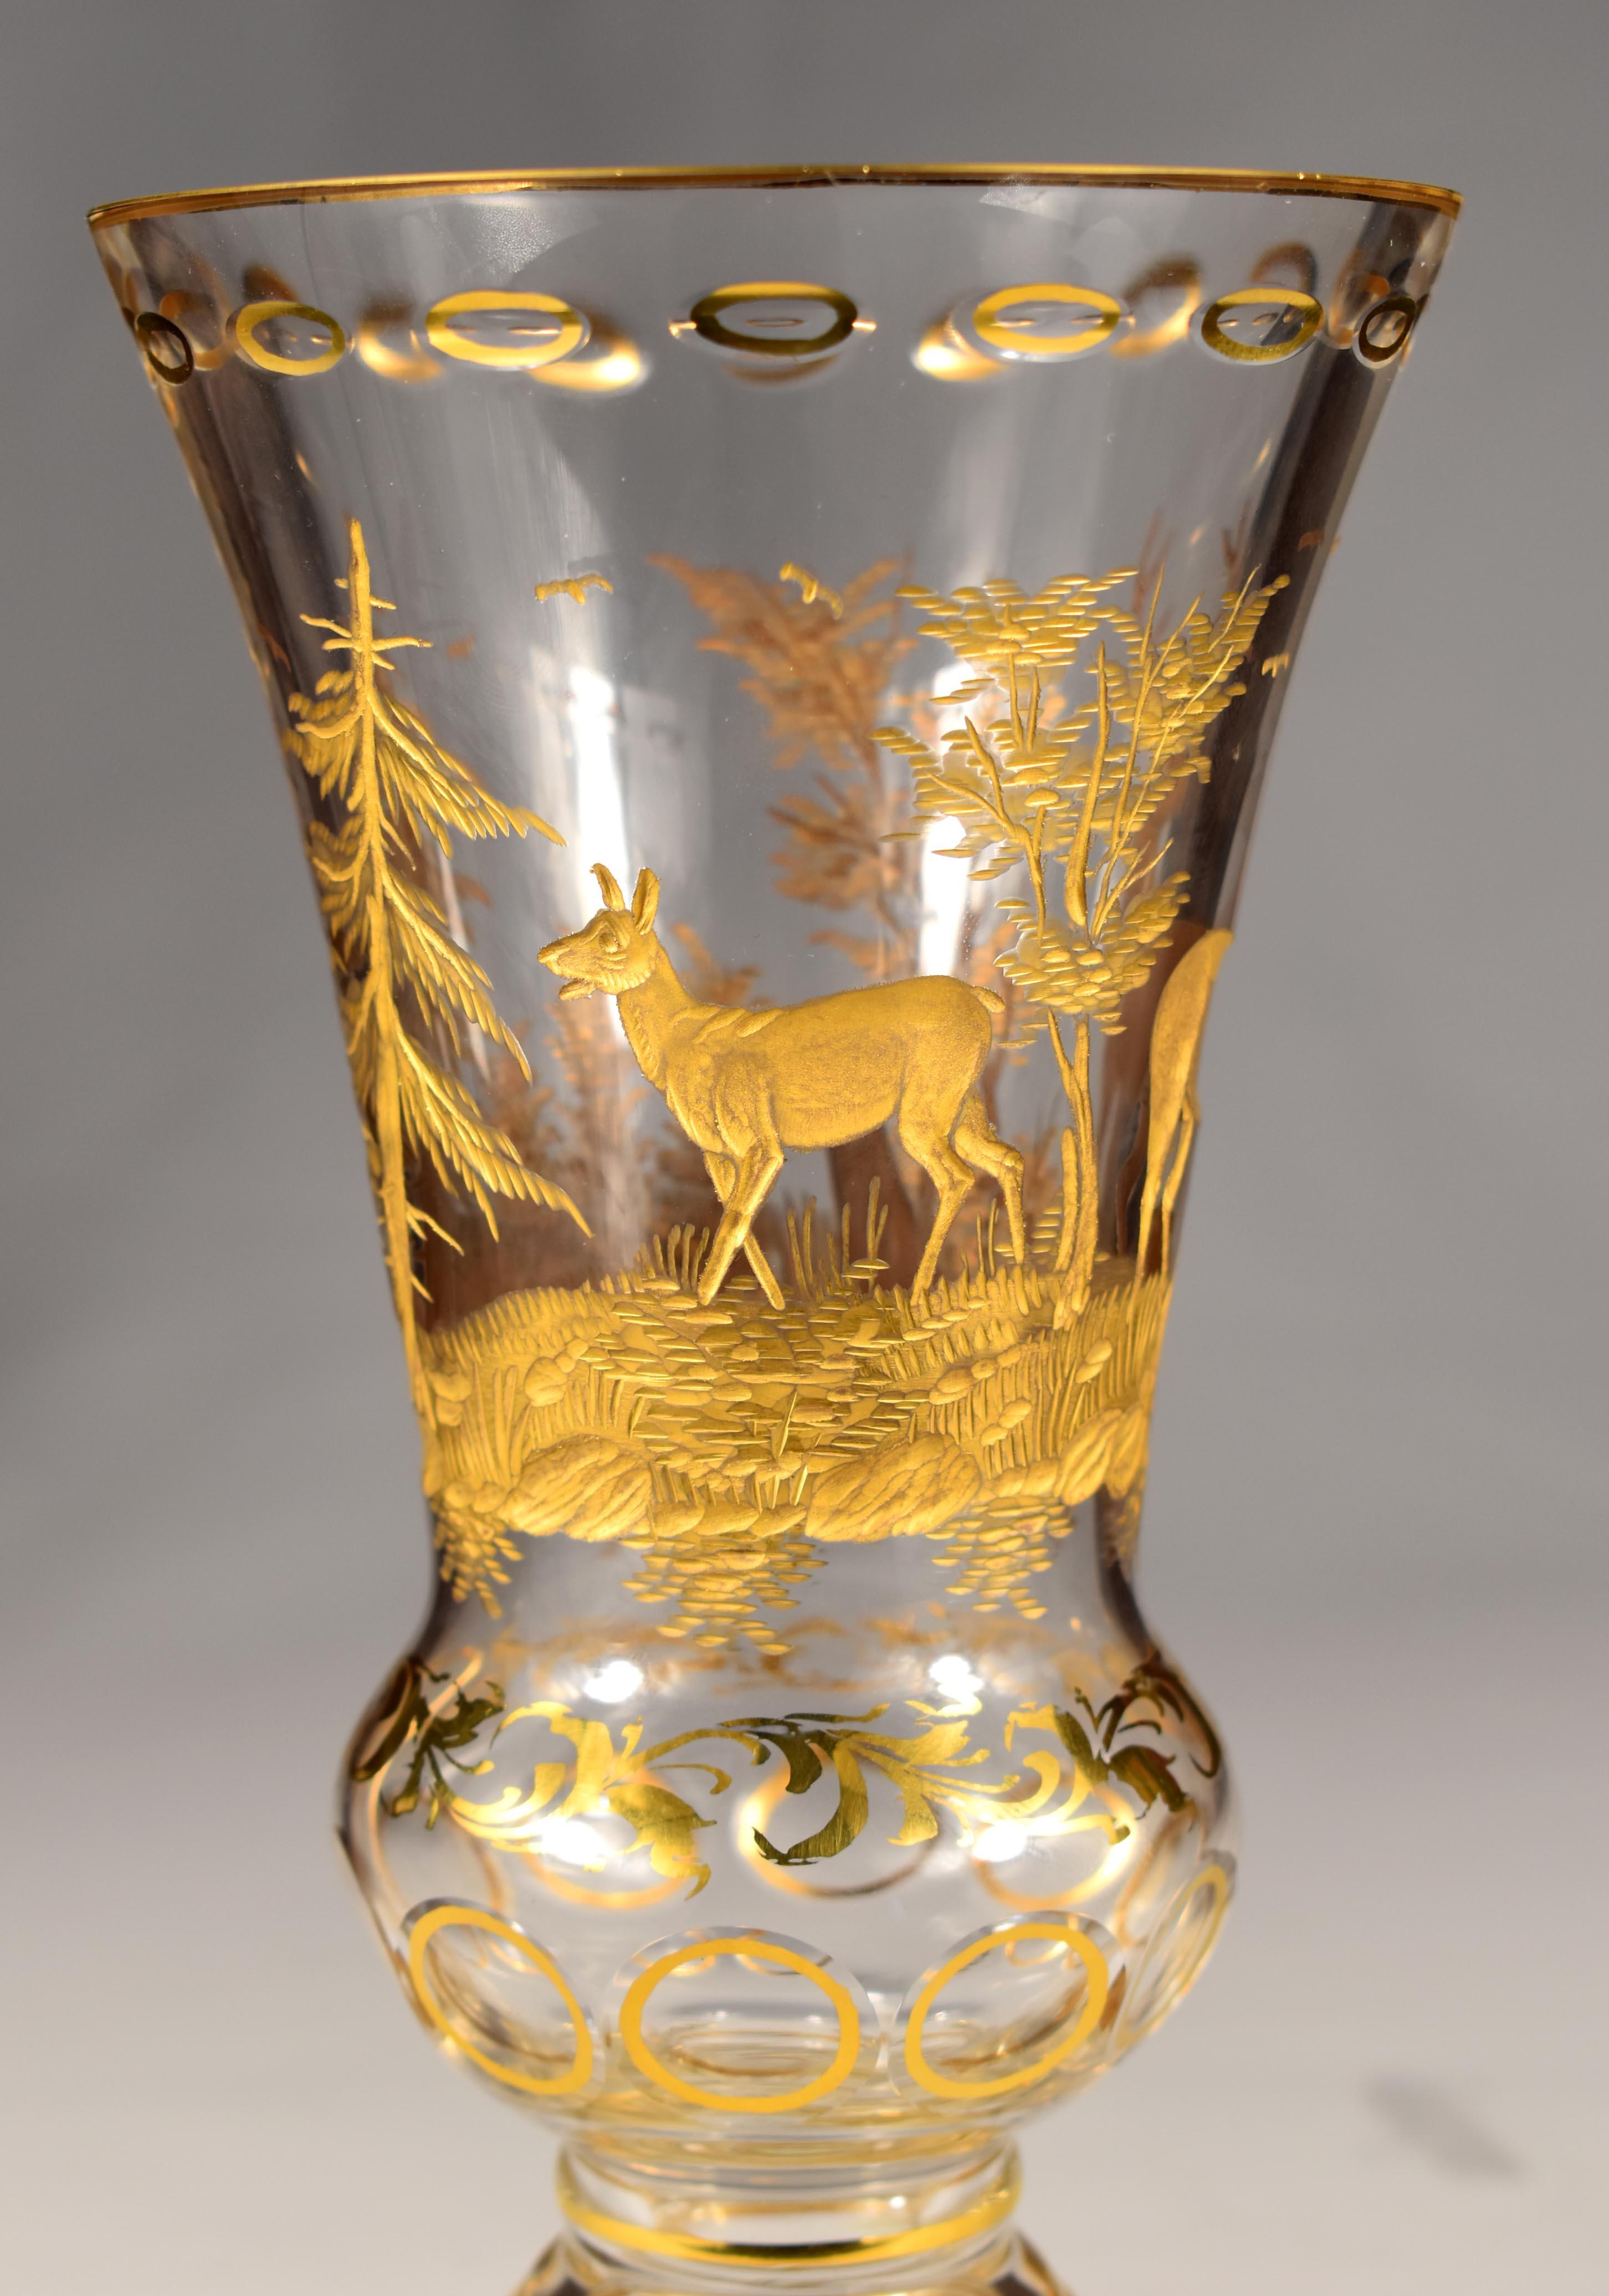 Gilded Vase + Two Gilded Glasses - Hunting motif. 20th century For Sale 1